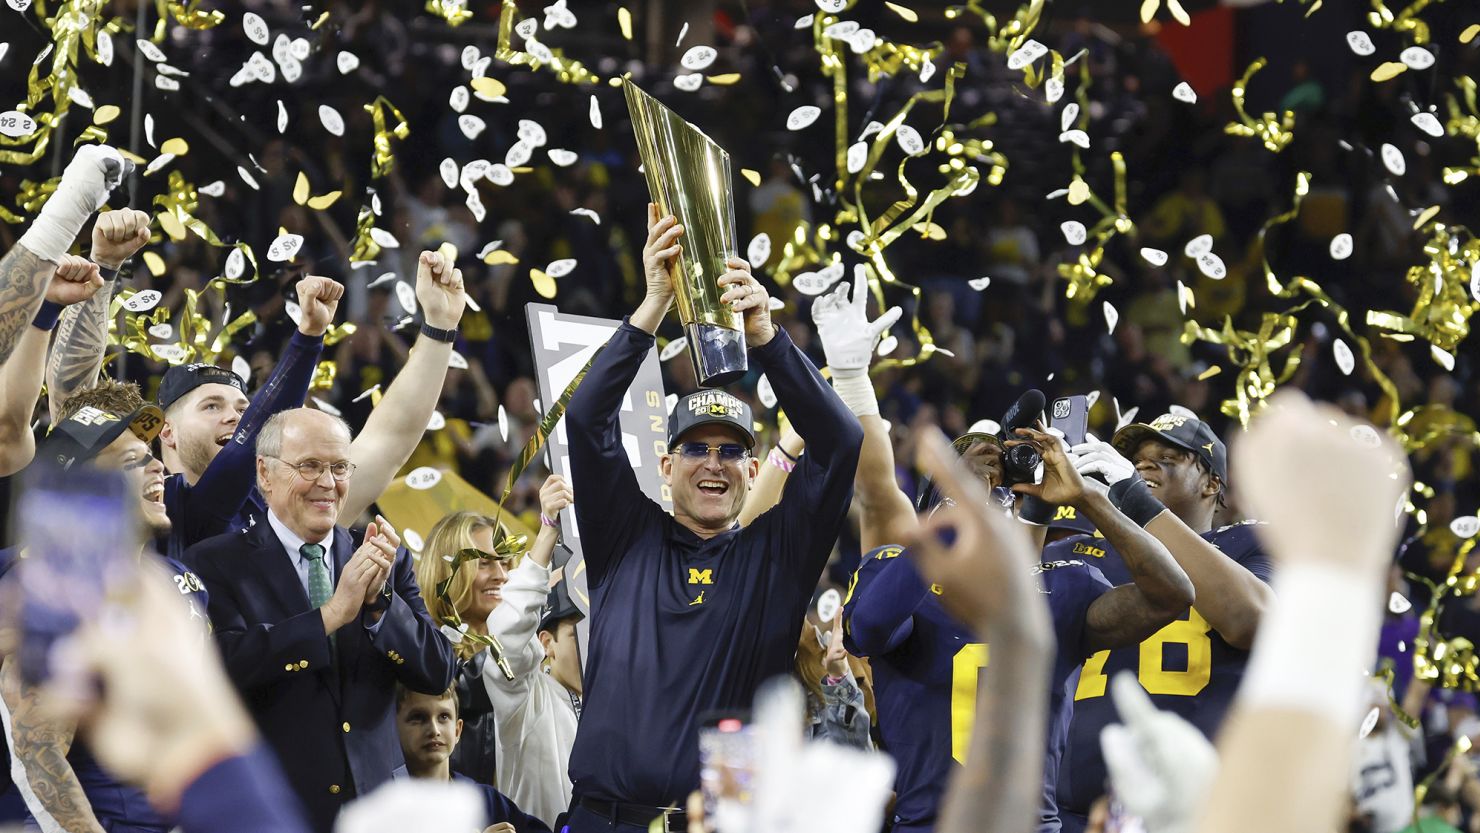 Jim Harbaugh After winning national title at Michigan, could head